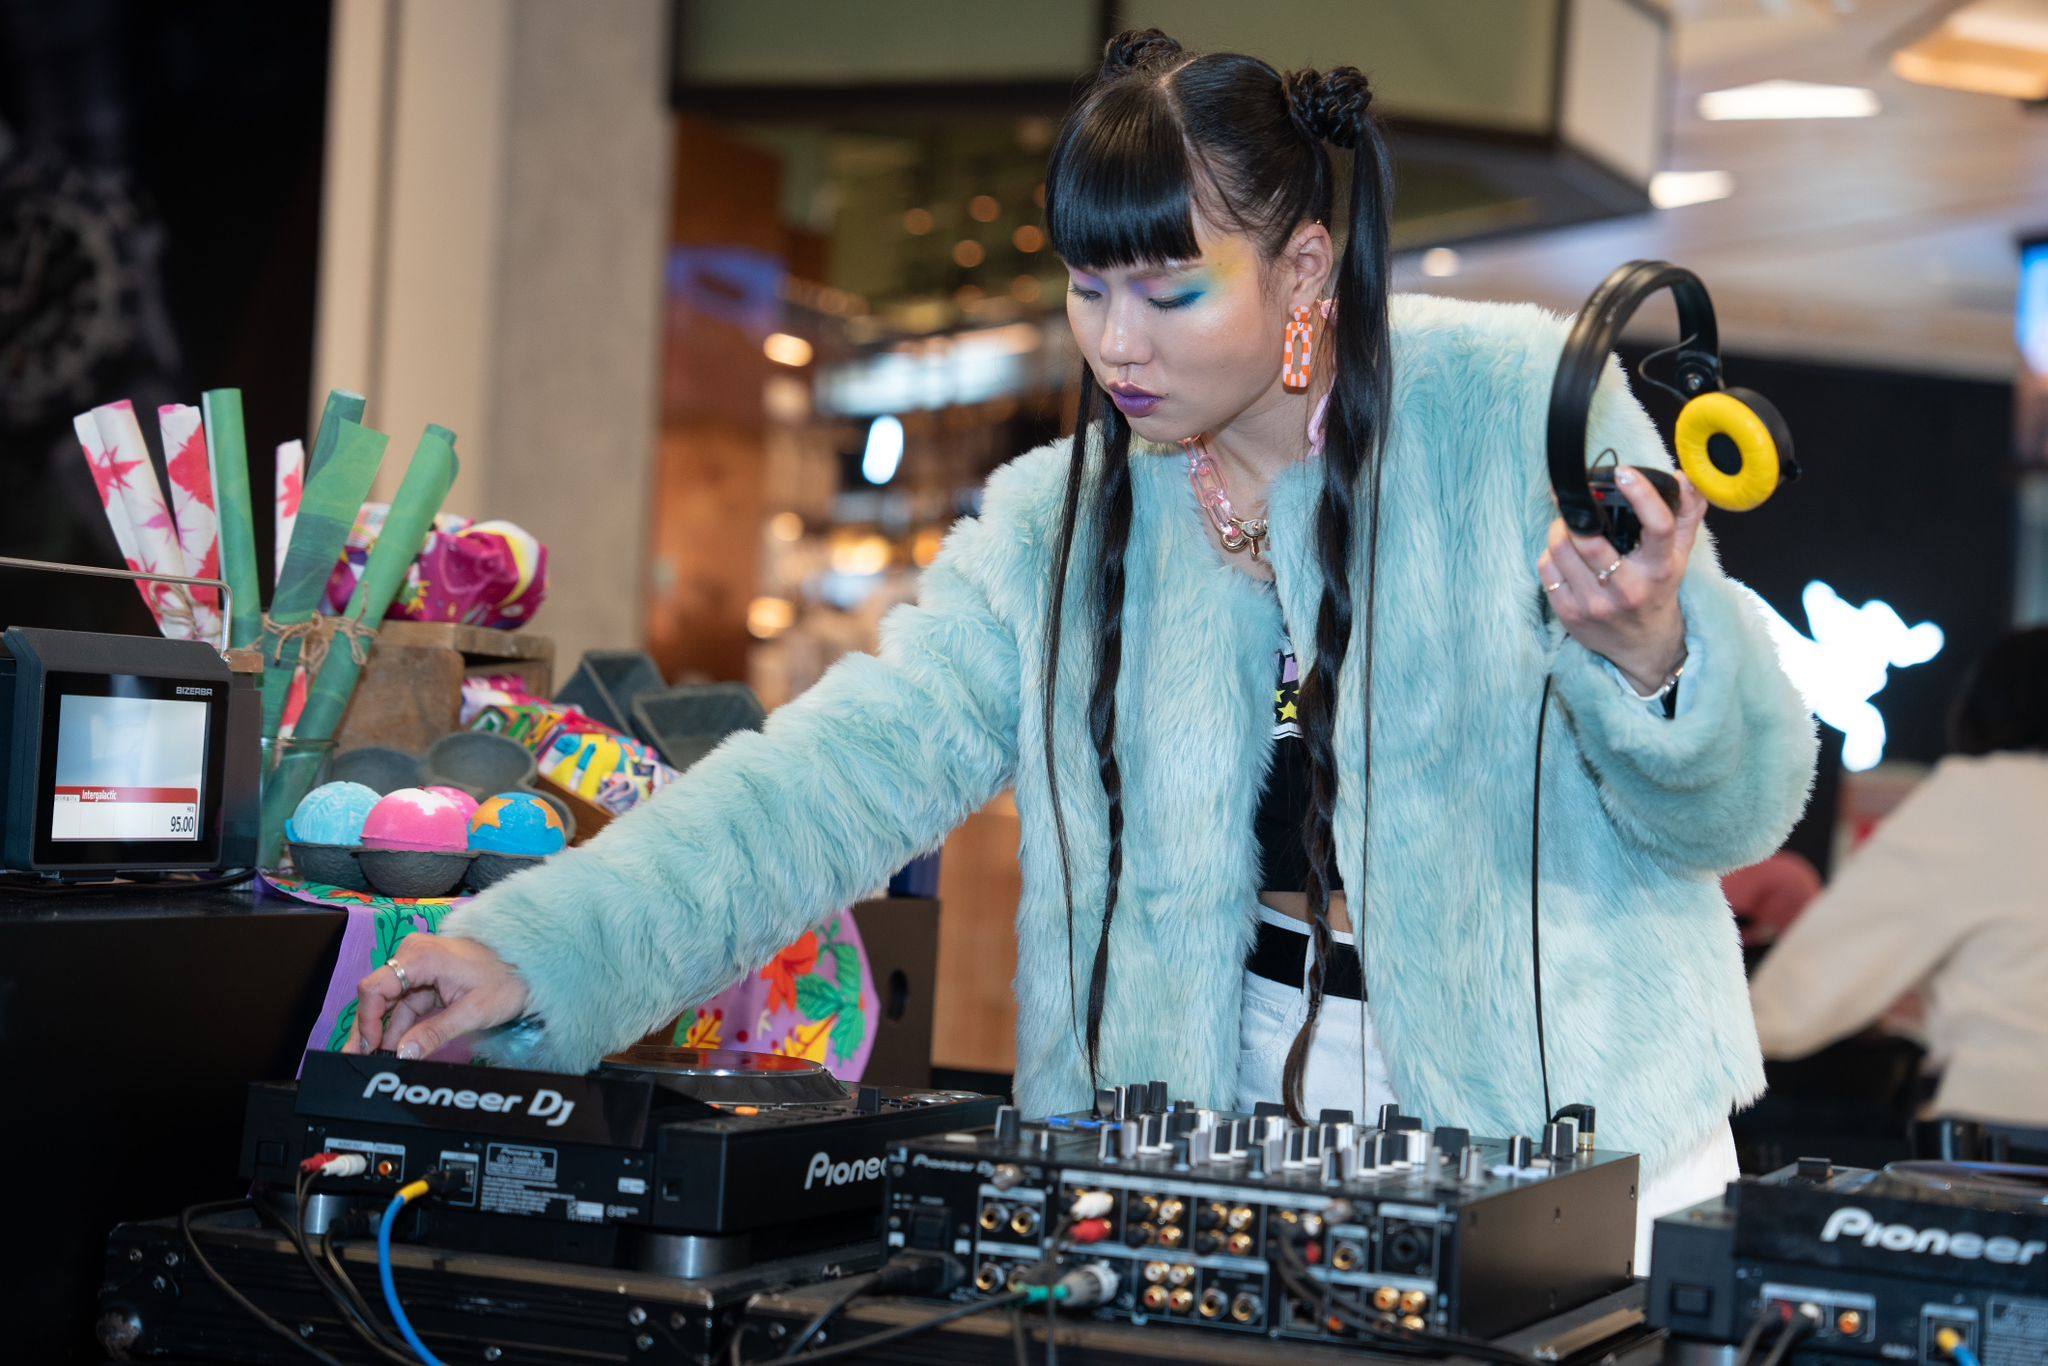 Just Bee DJing for an event at K11 Art Mall in Tsim Sha Tsui, Kowloon. Photo: Just Bee